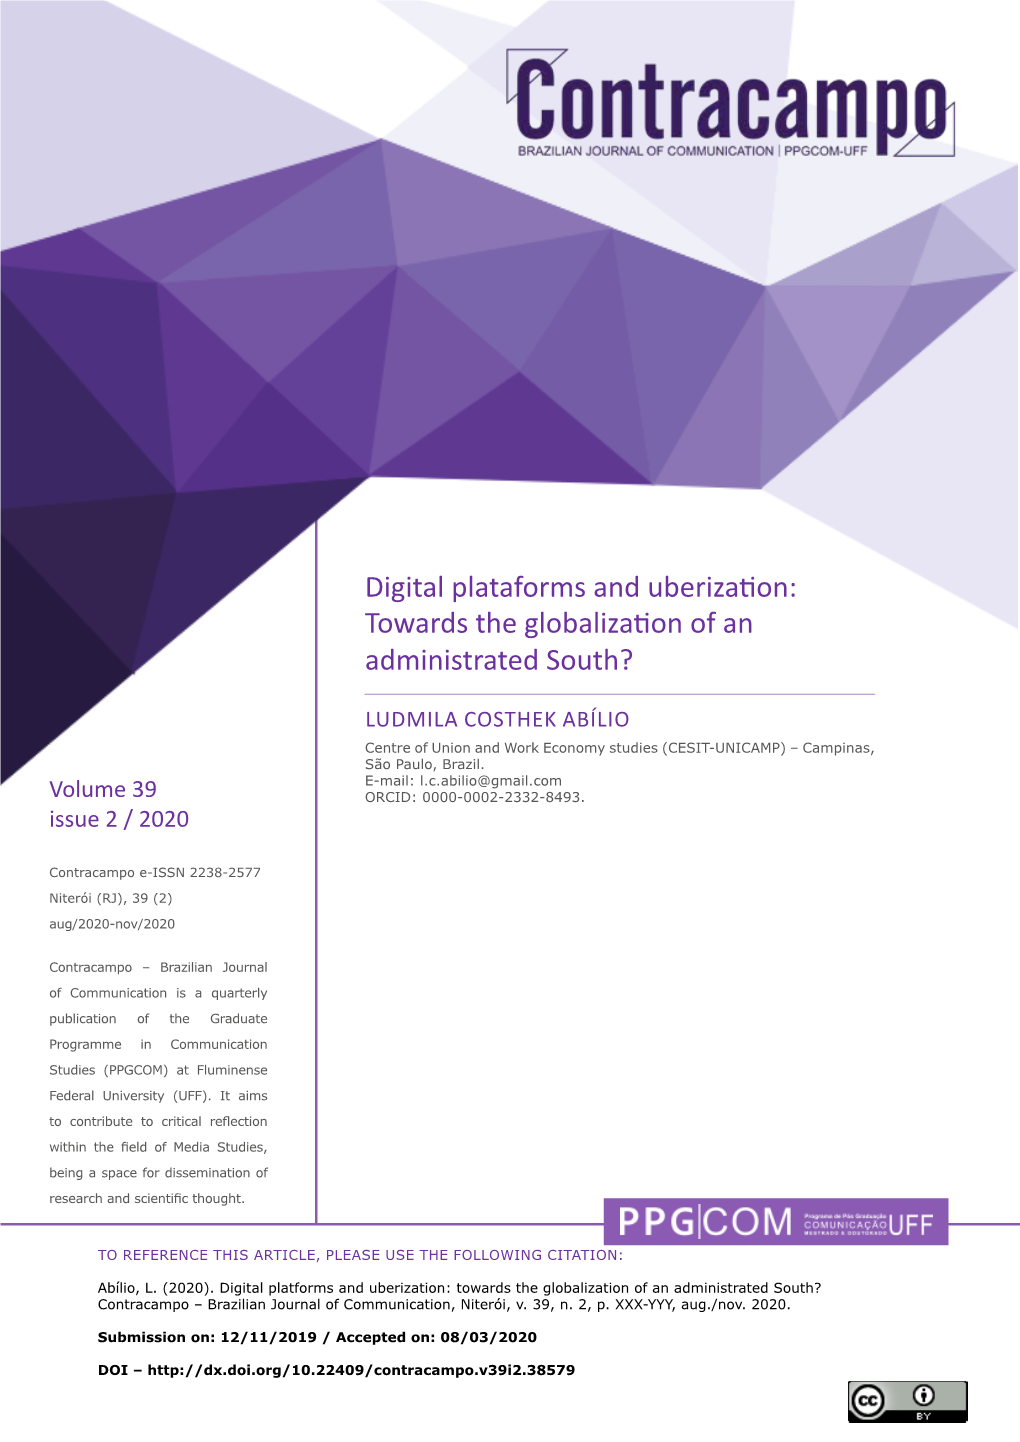 Digital Plataforms and Uberization: Towards the Globalization of an Administrated South?